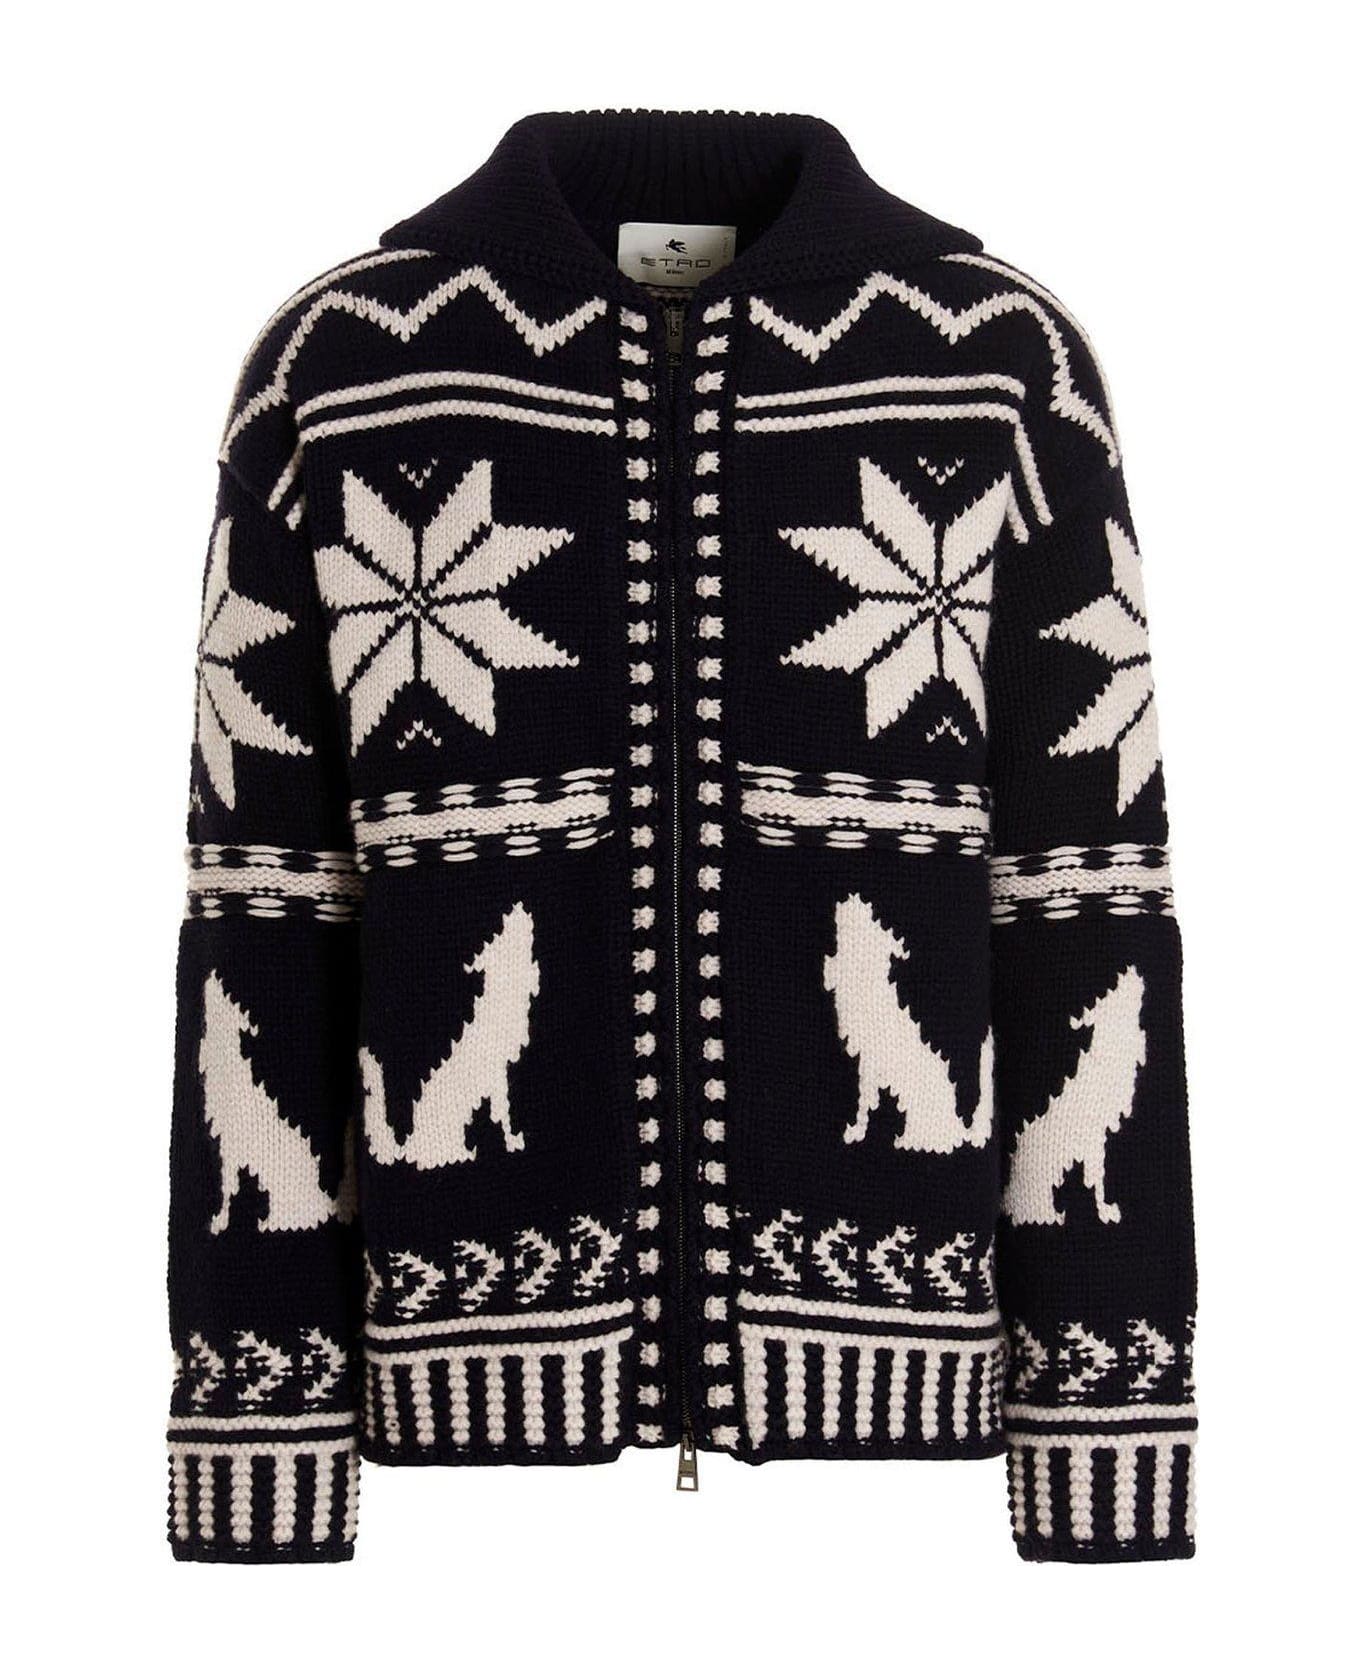 Etro Graphic Knitted Zip-up Jacket - NAVY カーディガン